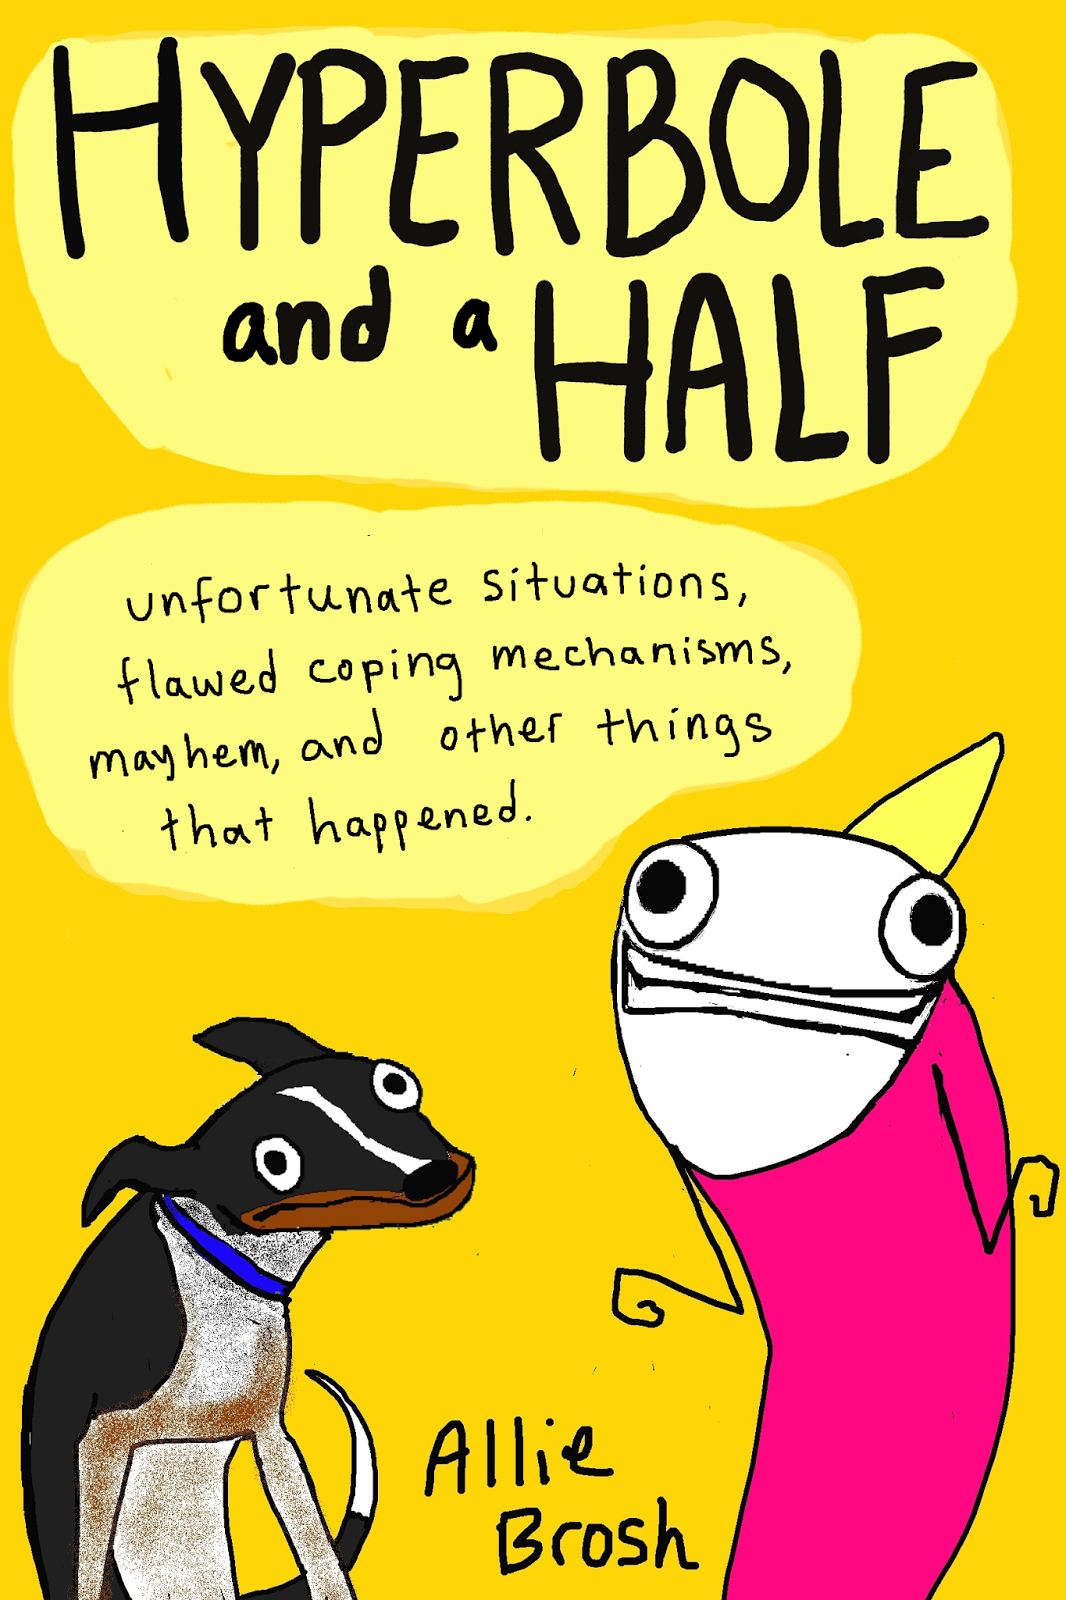 Link to Book review: Hyperbole and a half